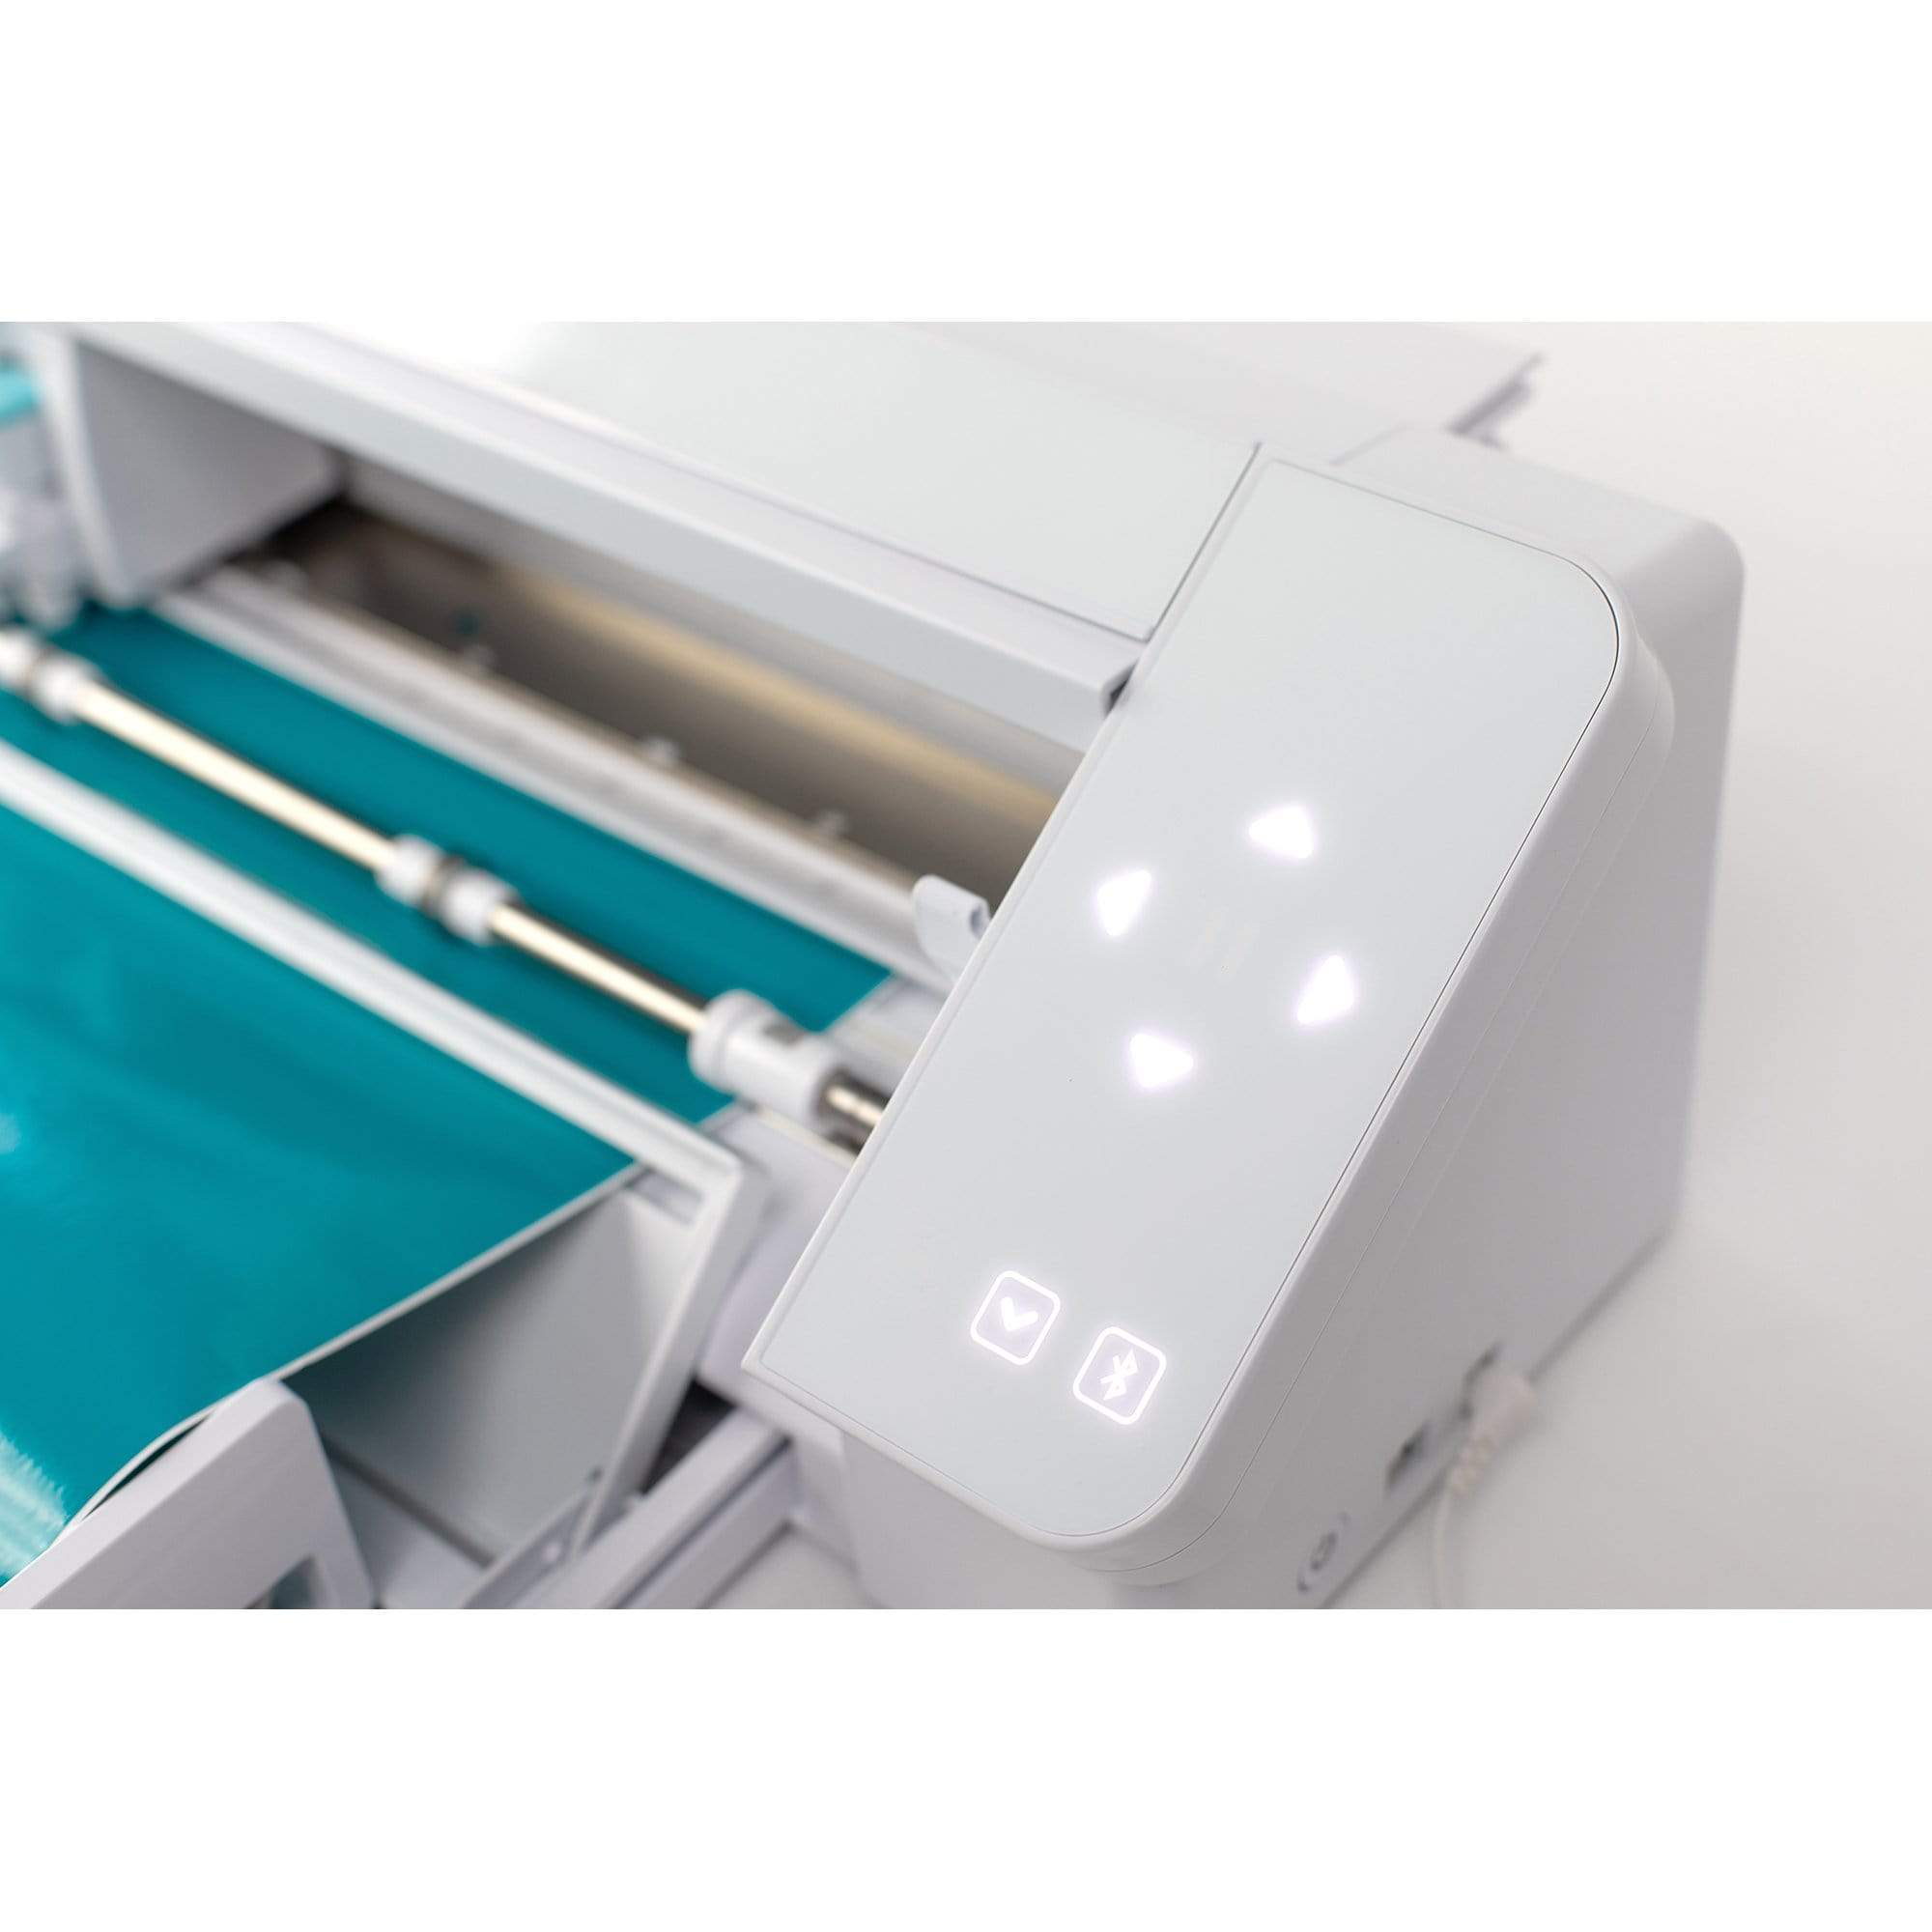 Silhouette America vinyl Cutters Silhouette Cameo 4 Vinyl Cutting Machine 12" White Edition-Reconditioned